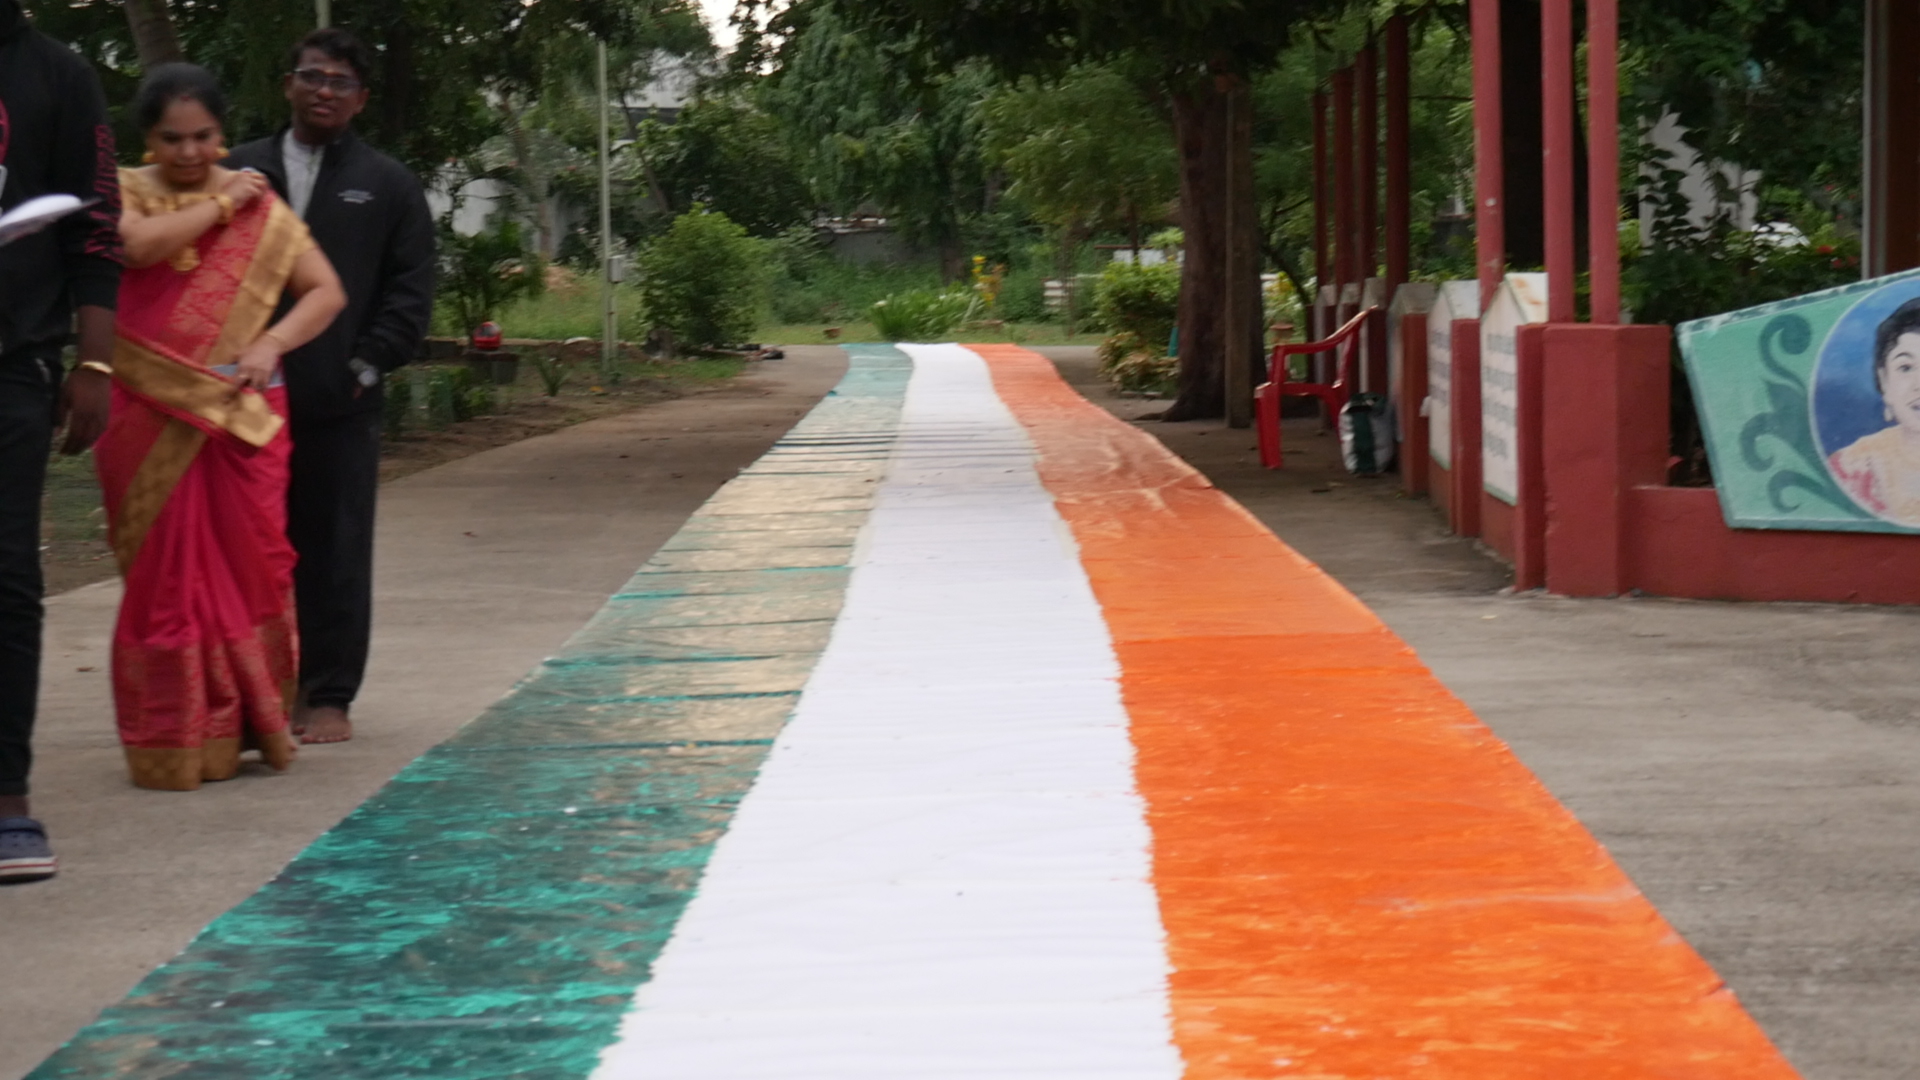 THE FIRST PERSON IN THE WORLD, TO DRAW THE LONGEST INDIAN NATIONAL FLAG  NON-STOP FOR 49 HOURS USING HIS TONGUE ONLY